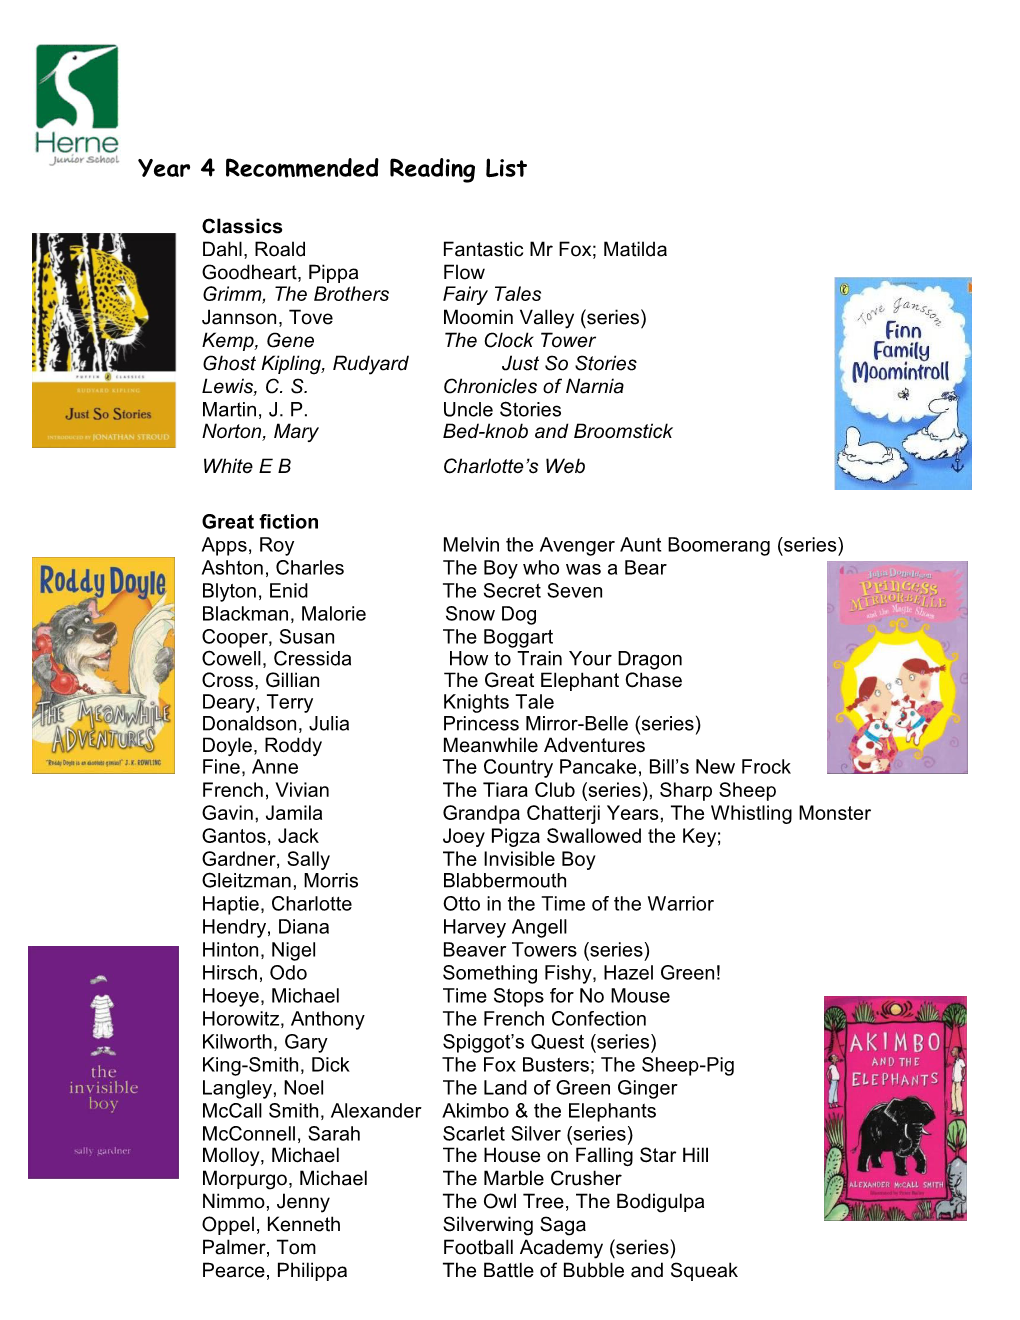 Year 4 Recommended Reading List